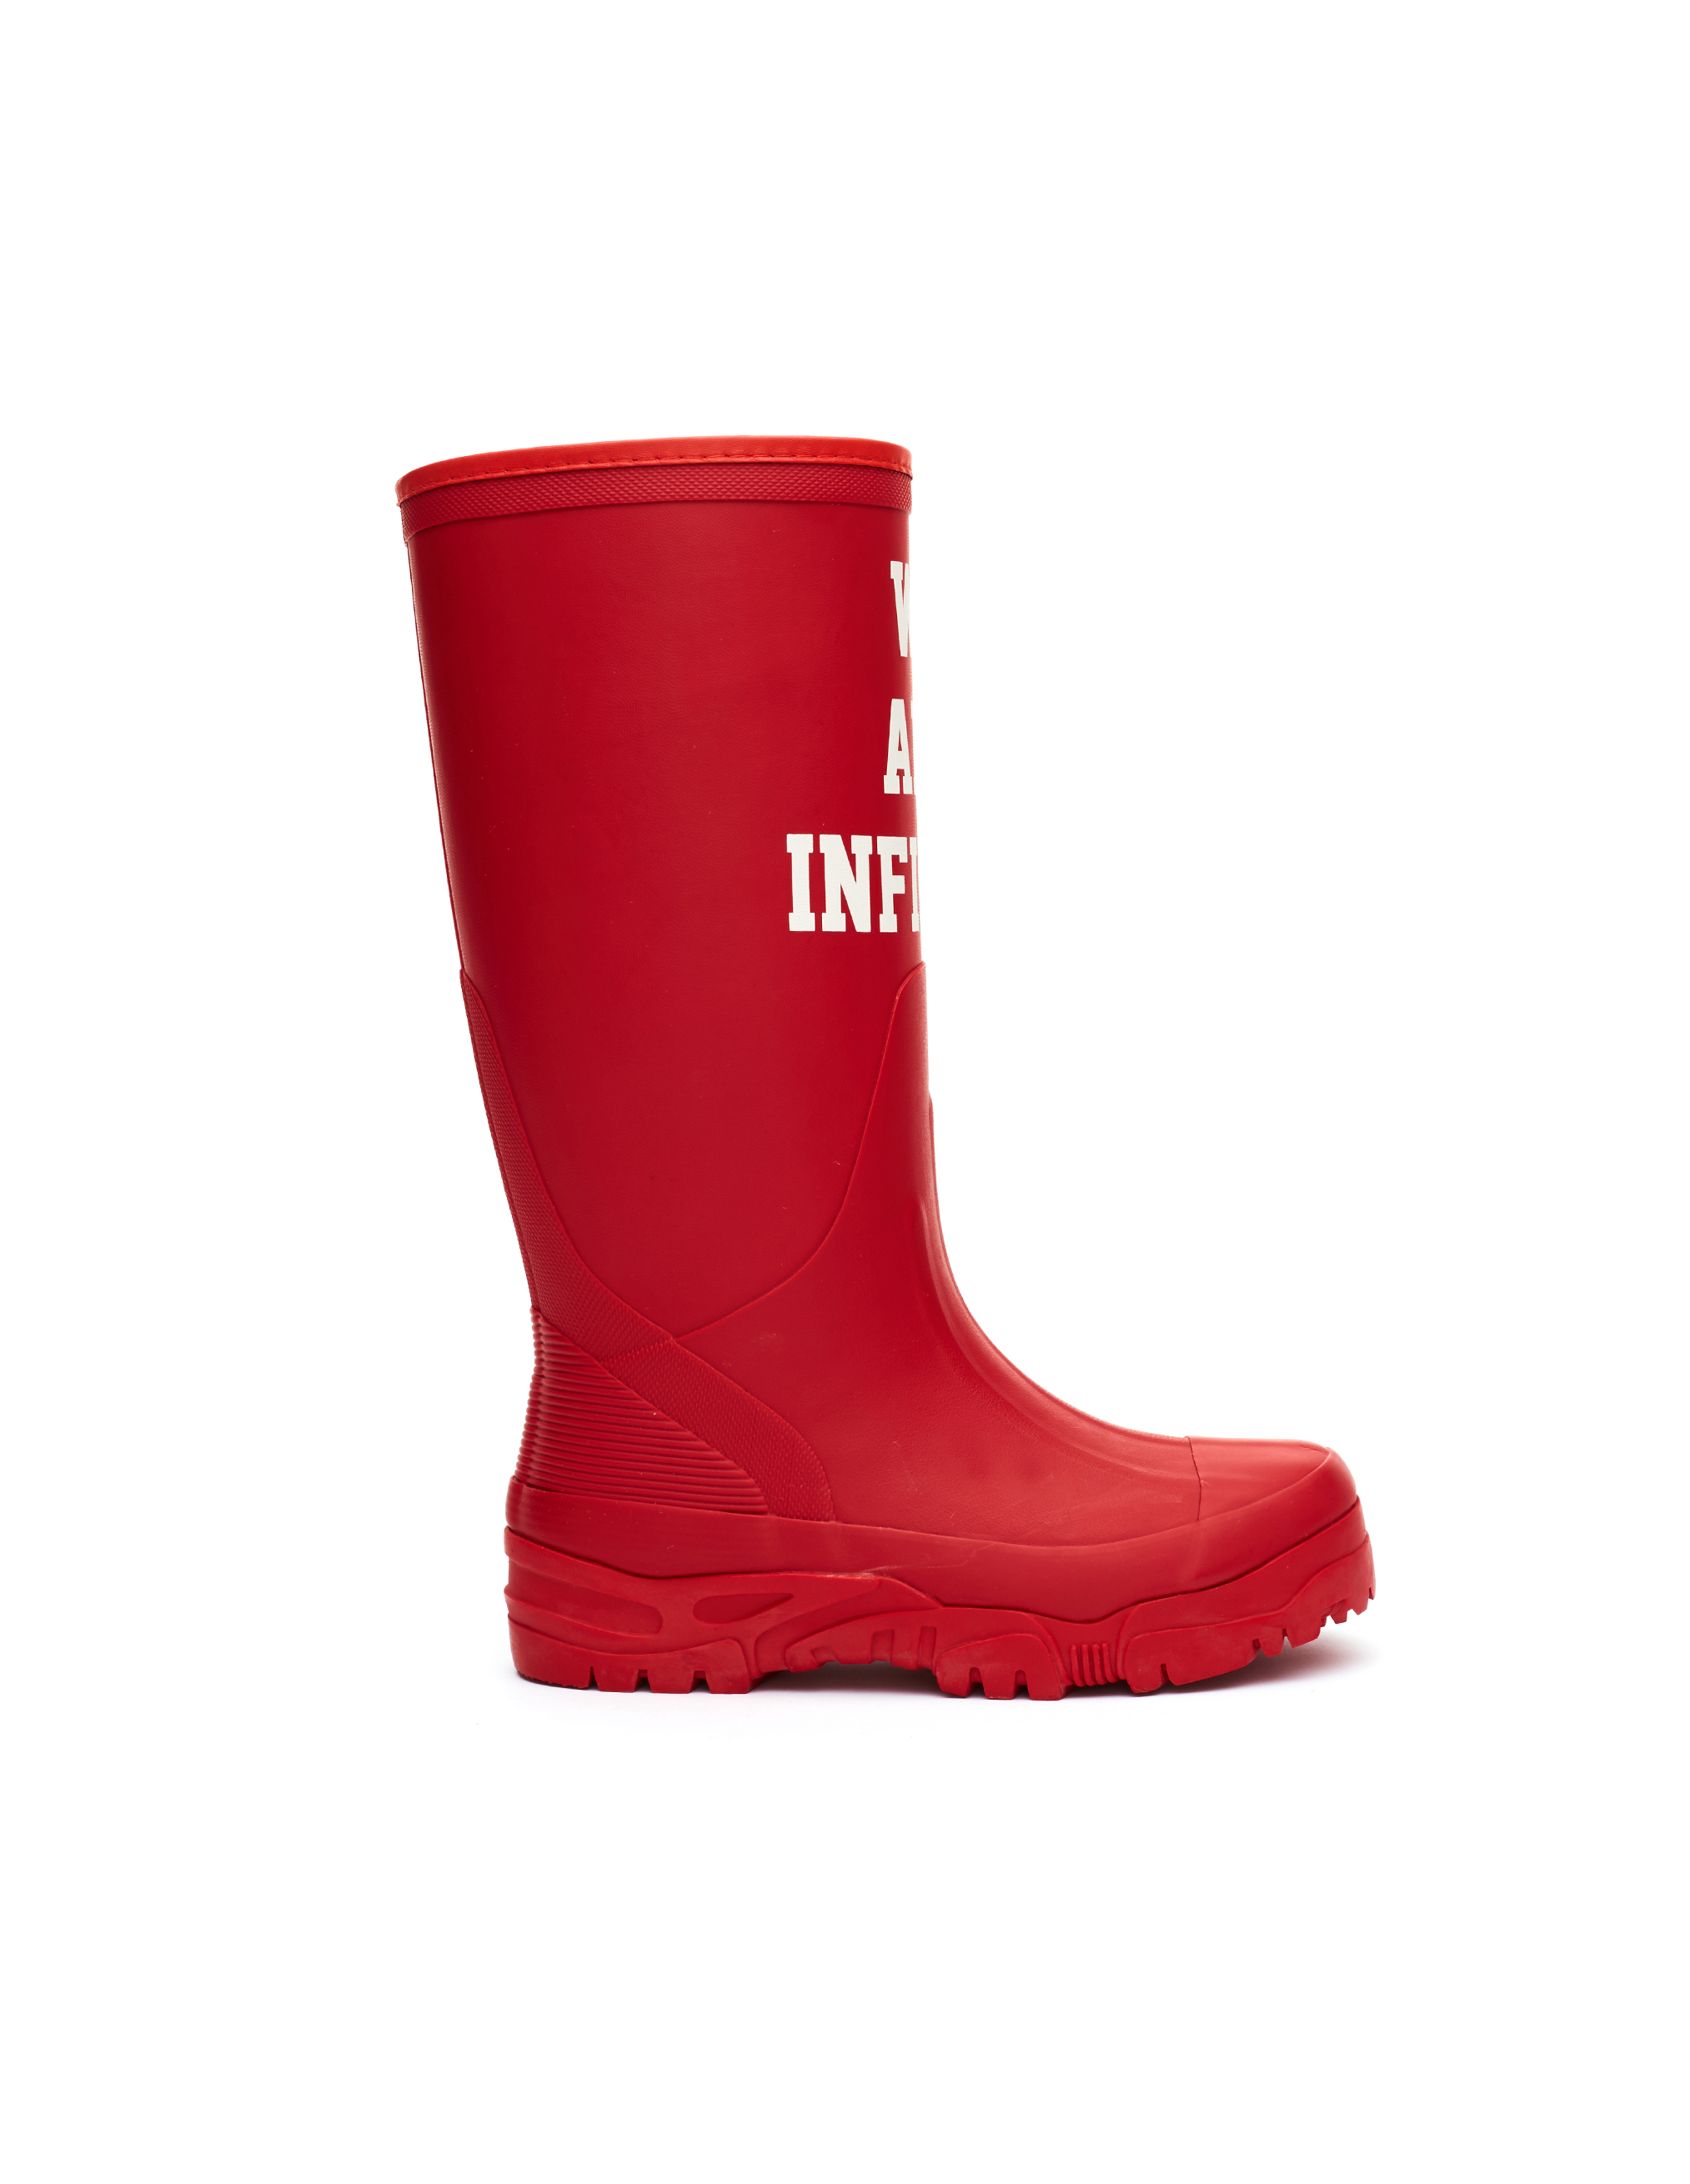 Undercover RED RUBBER BOOTS